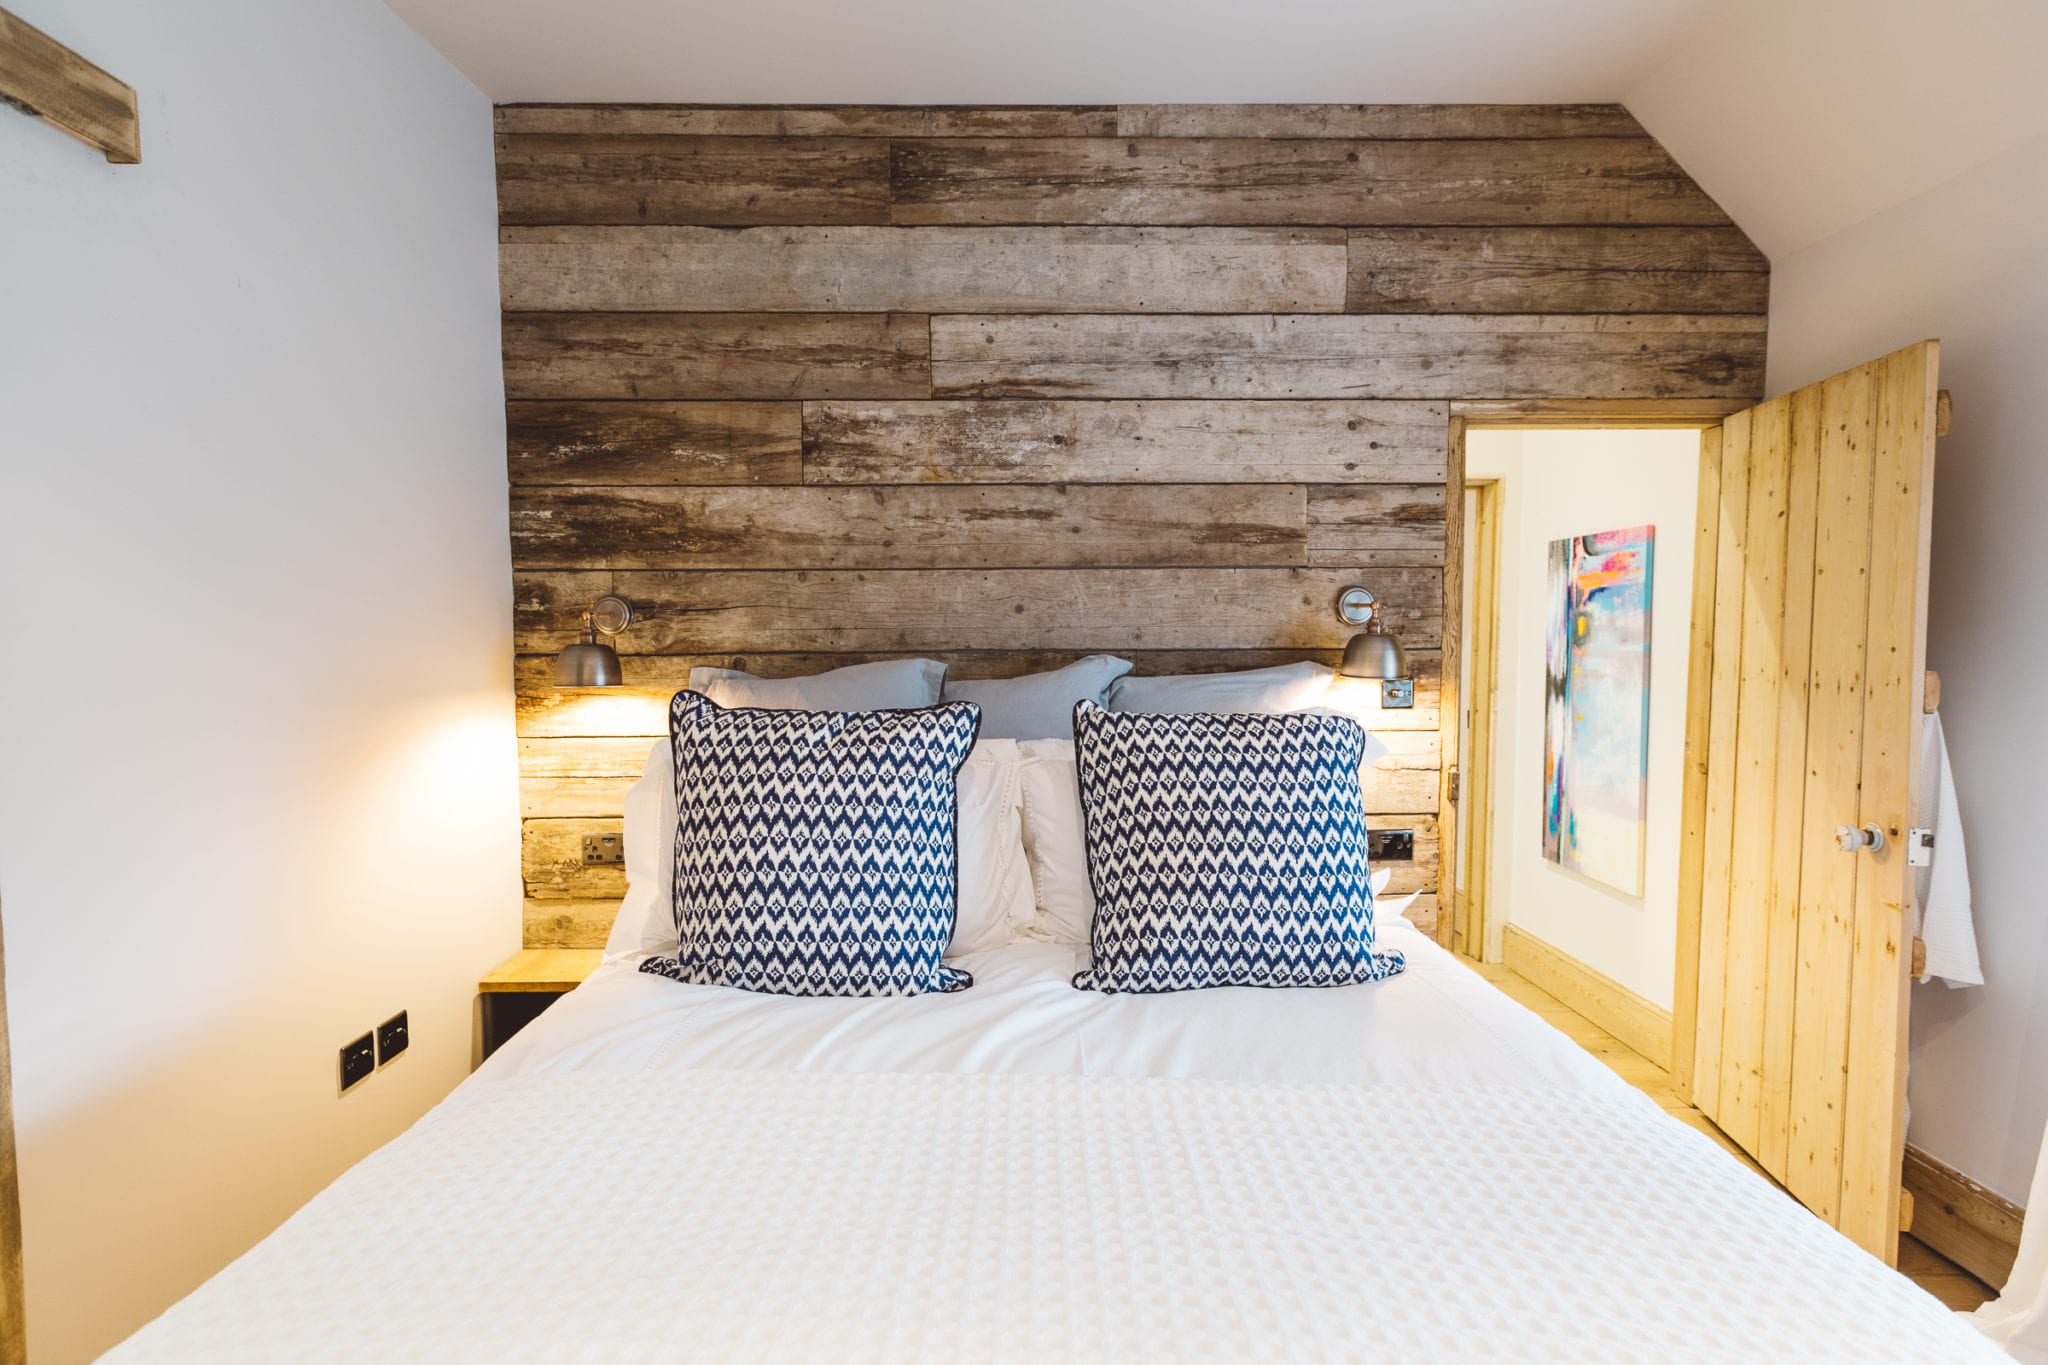 A stylish modern bedroom with a rustic wooden clad wall